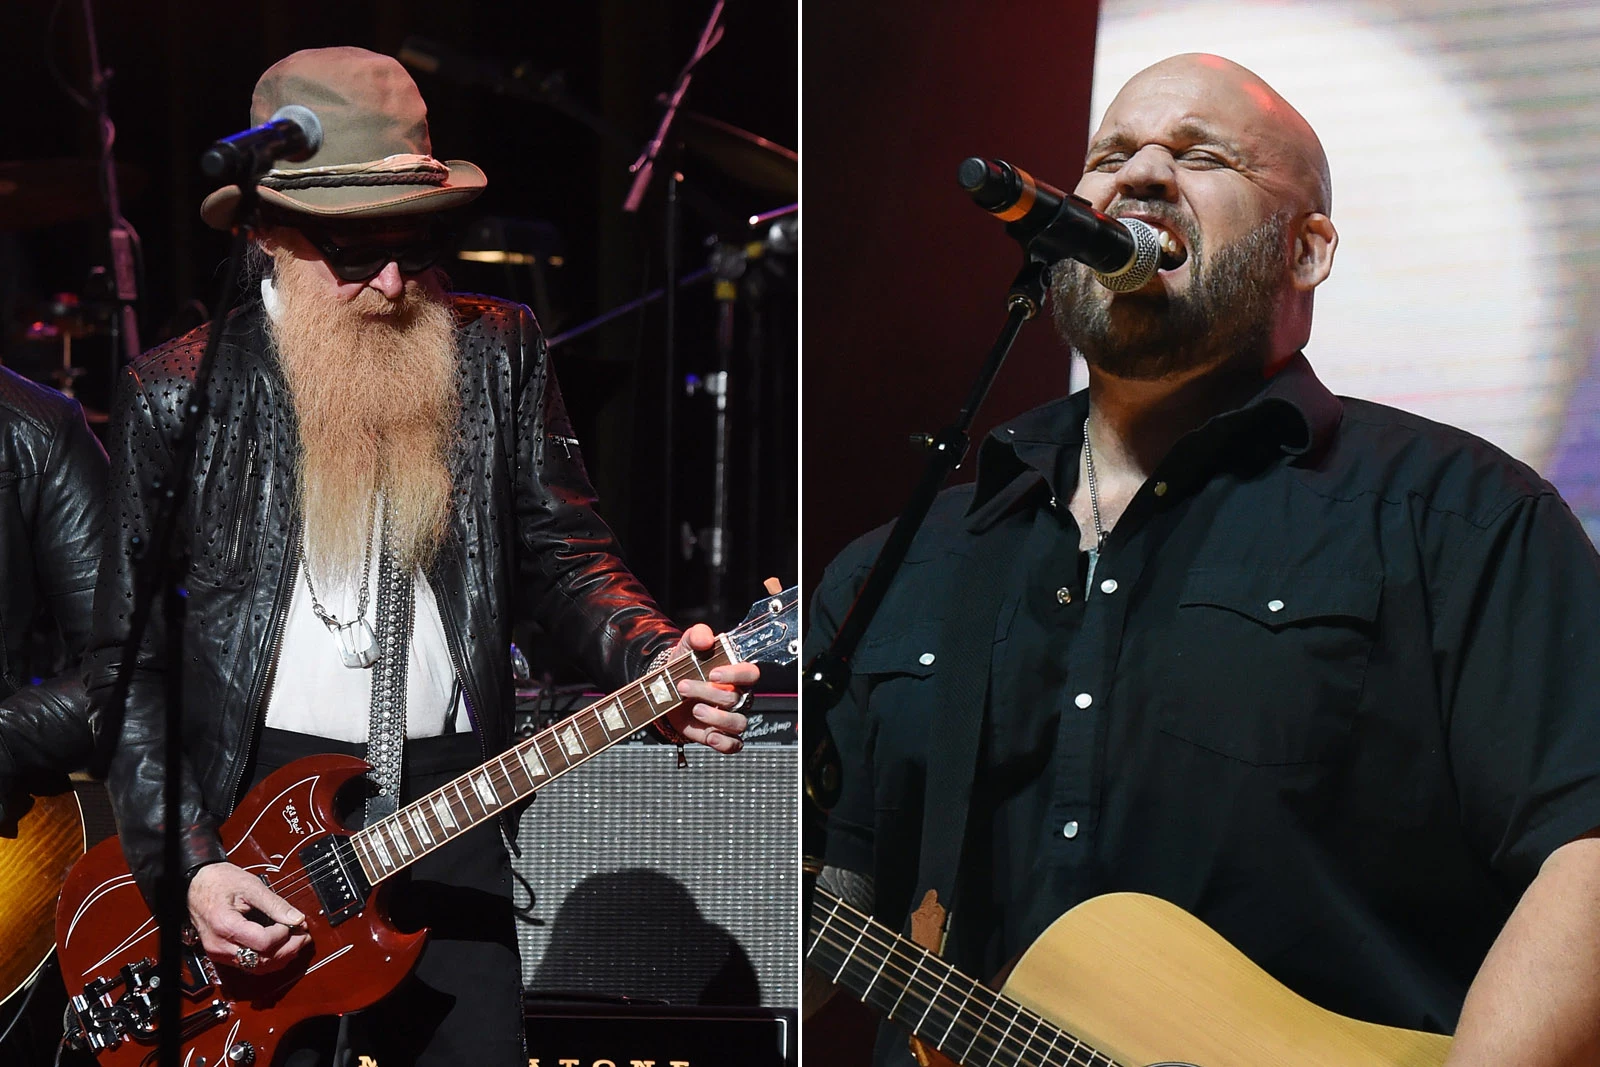 Billy Gibbons' Opening Act Says He Was Fired for Pro-Trump Views